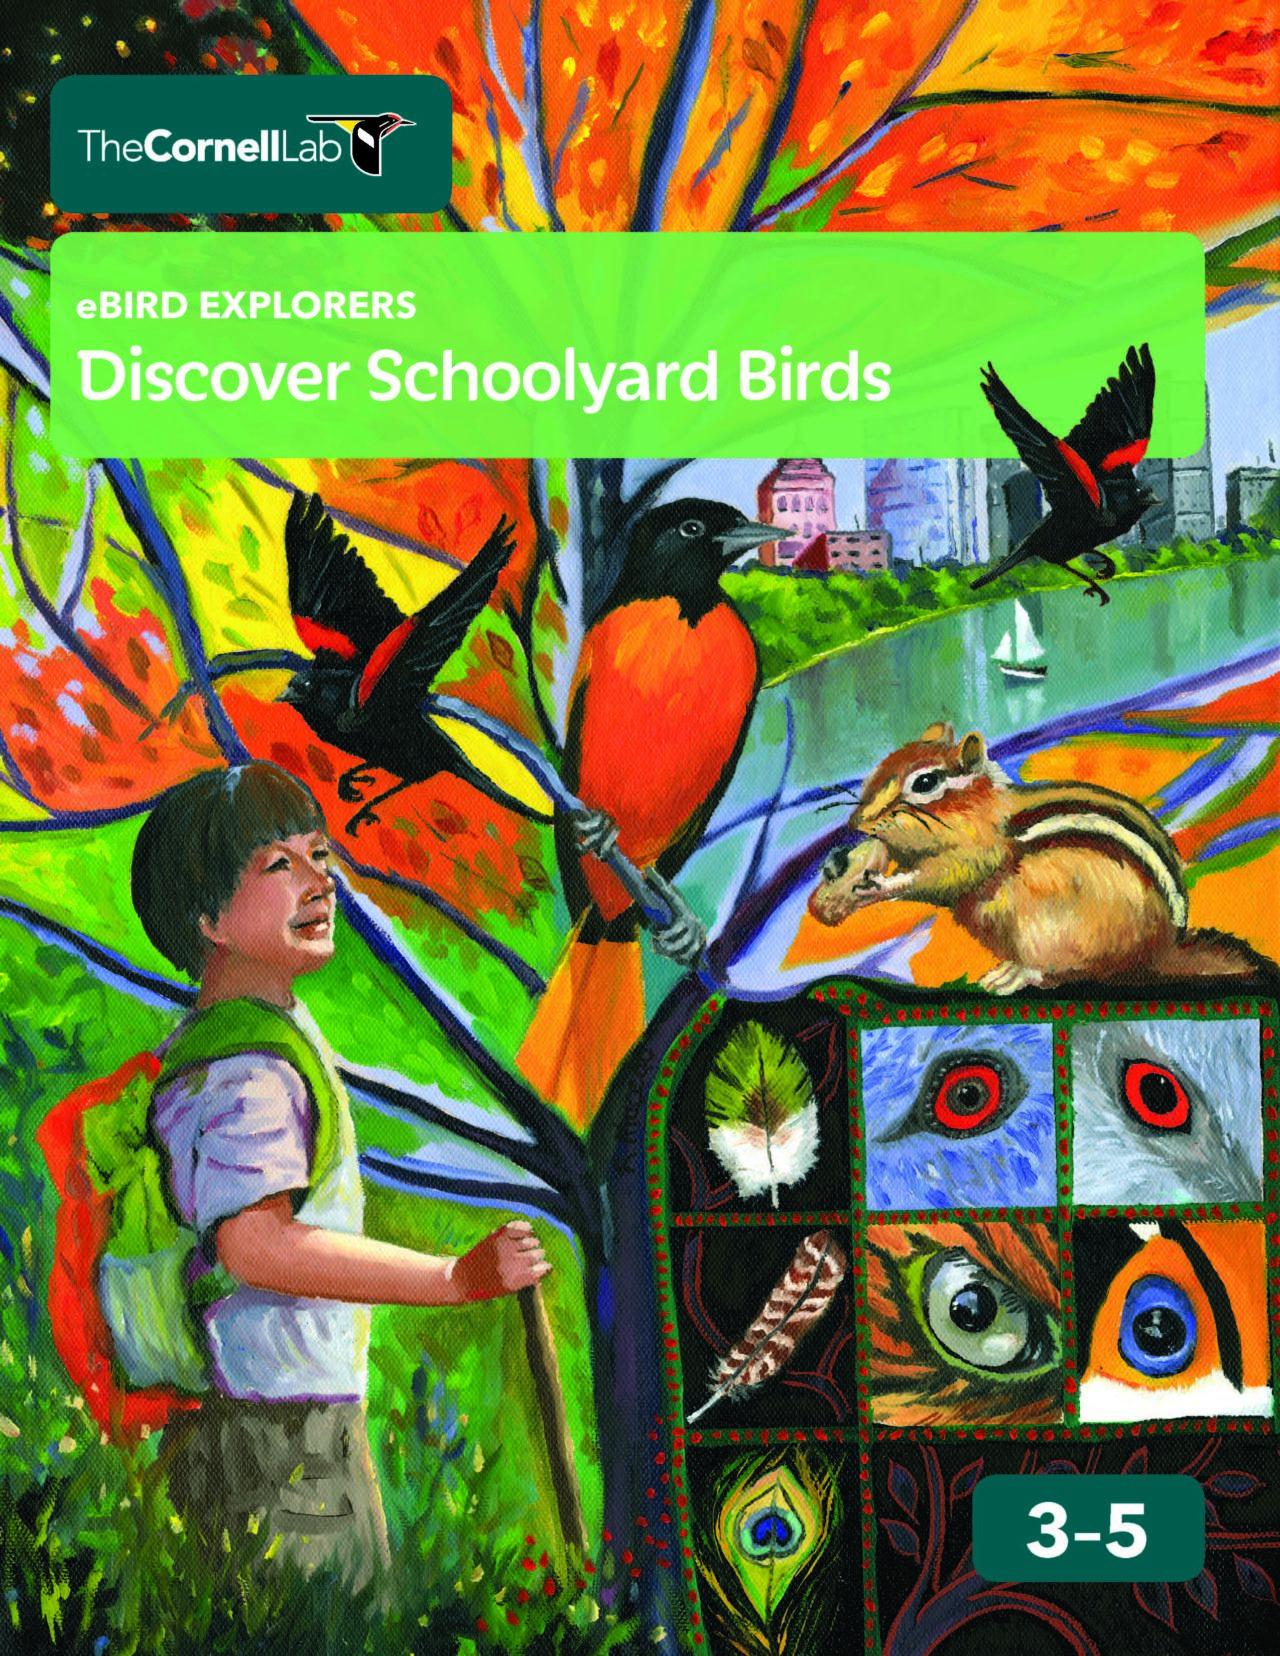 Image shows the eBird 3-5 cover titled "Discover Schoolyard Birds". It shows a child out in nature spotting a variety of animals.